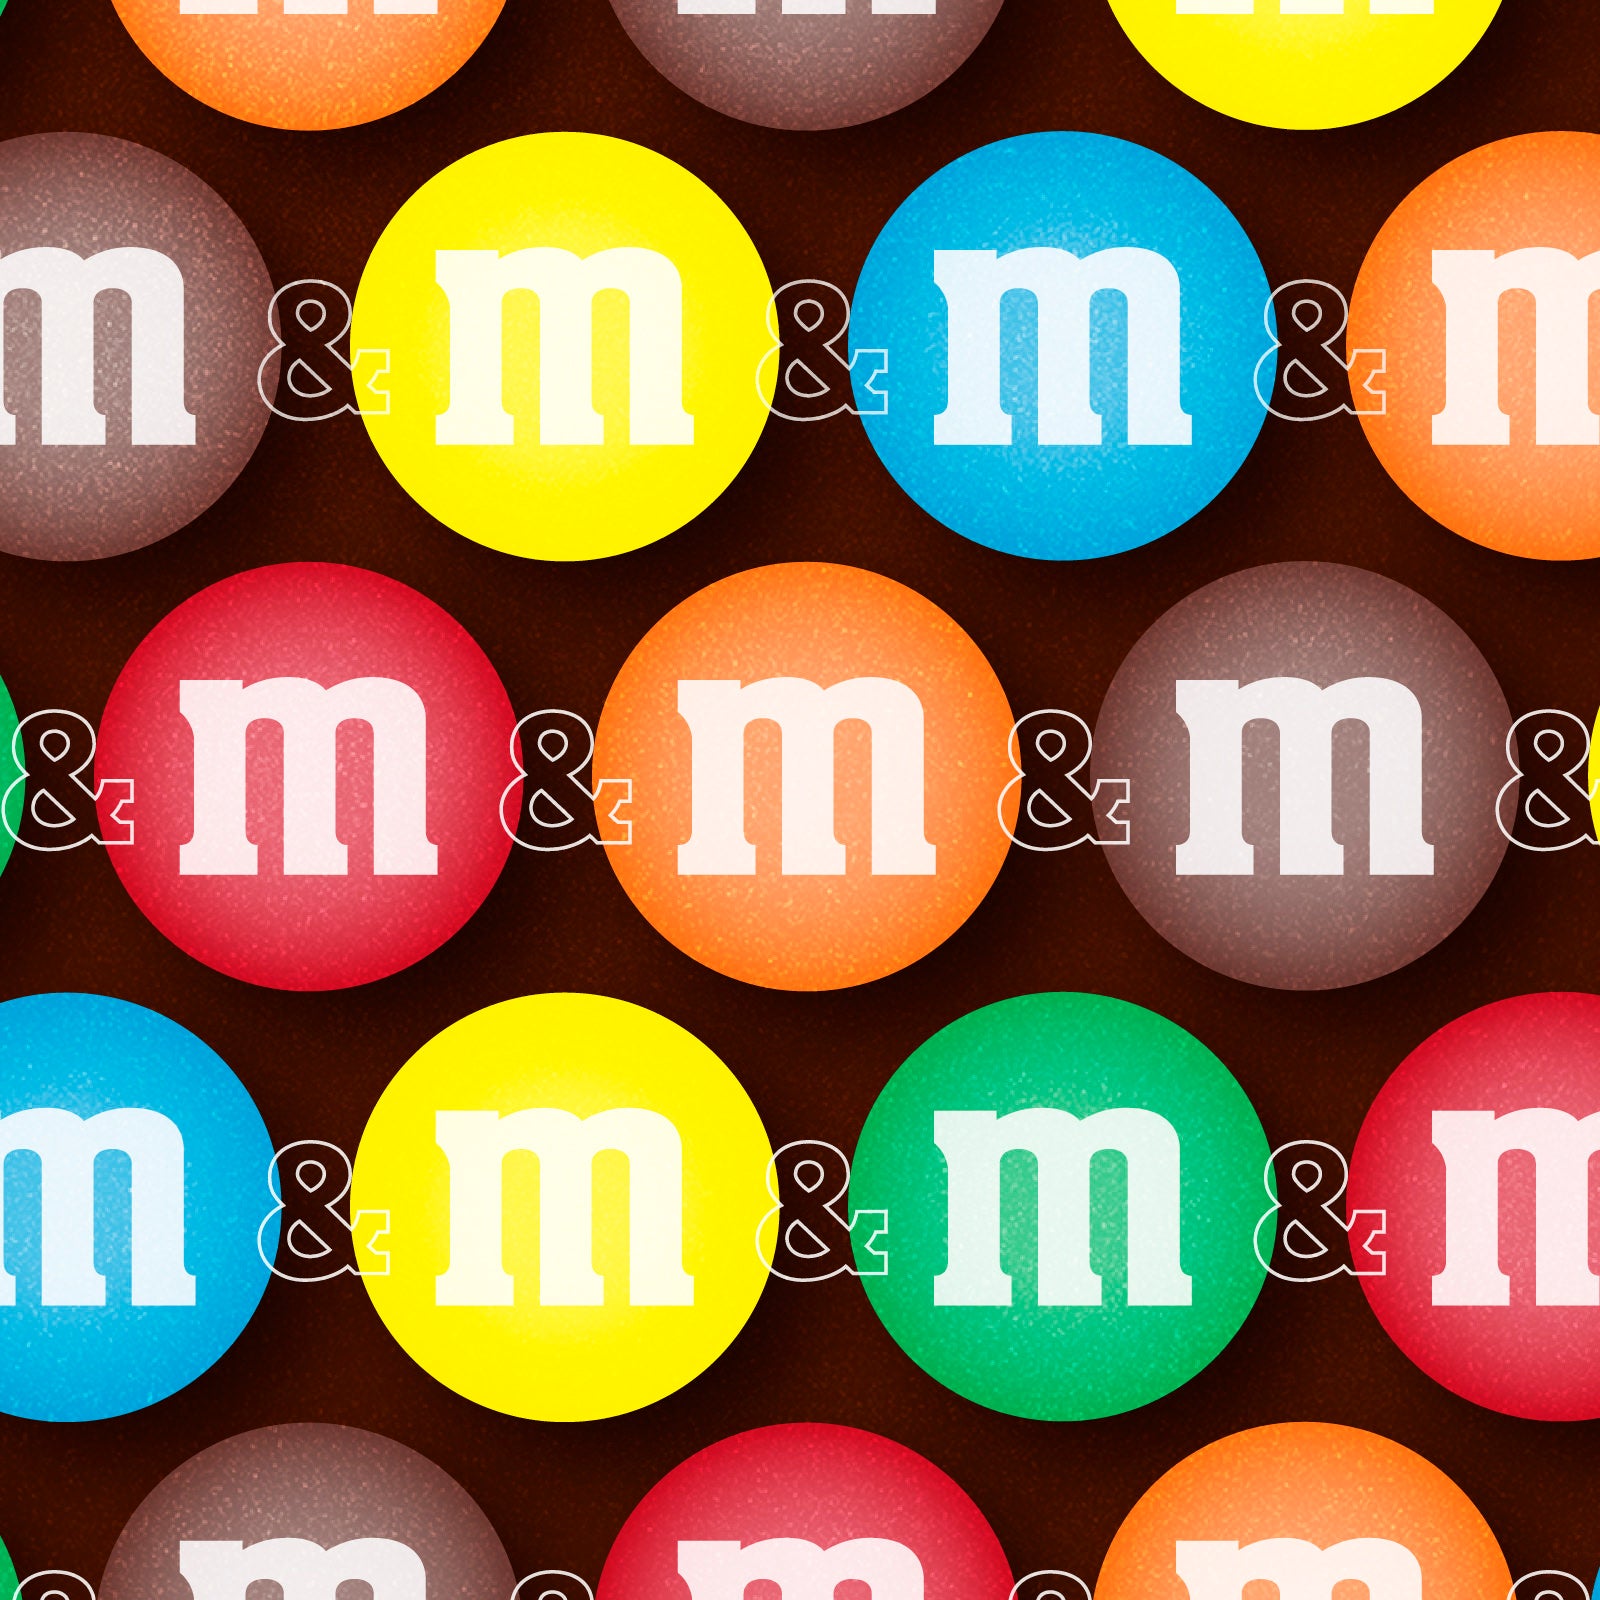 M&Ms Introduces 1st New Character In More Than A Decade: Purple